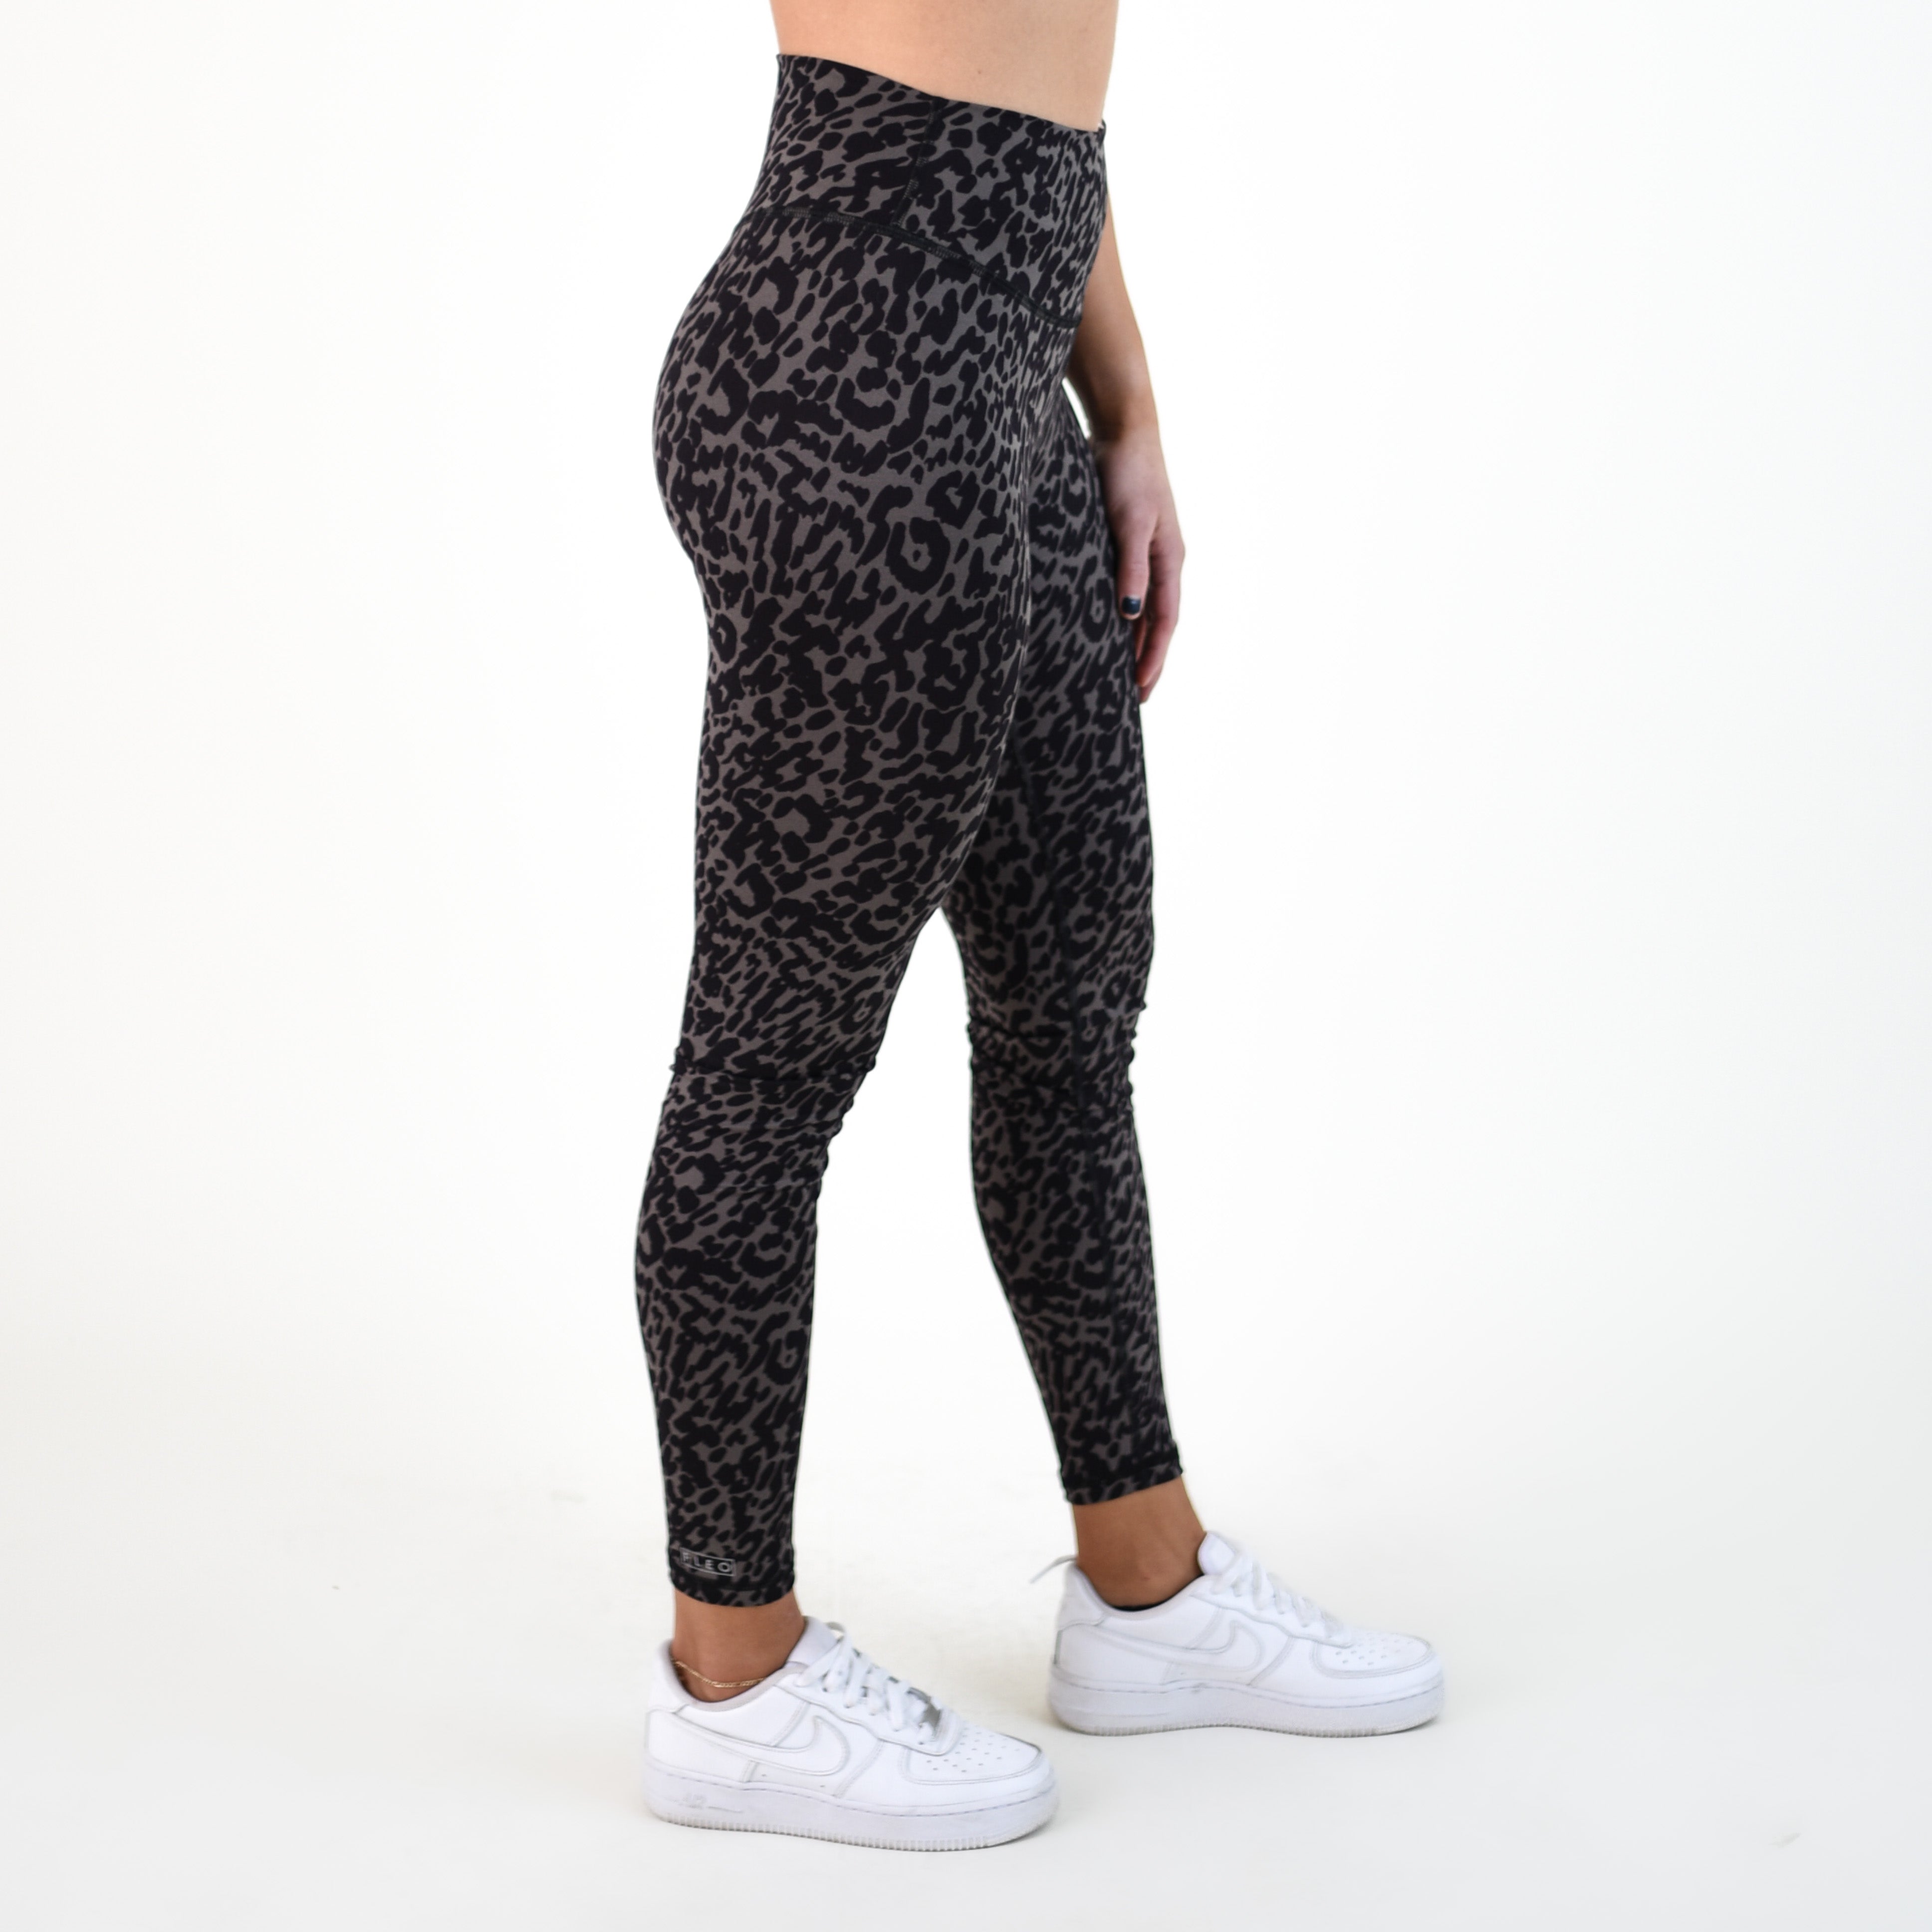 Leopard Chive Contoured Workout Legging - Go Go - Curved High Rise